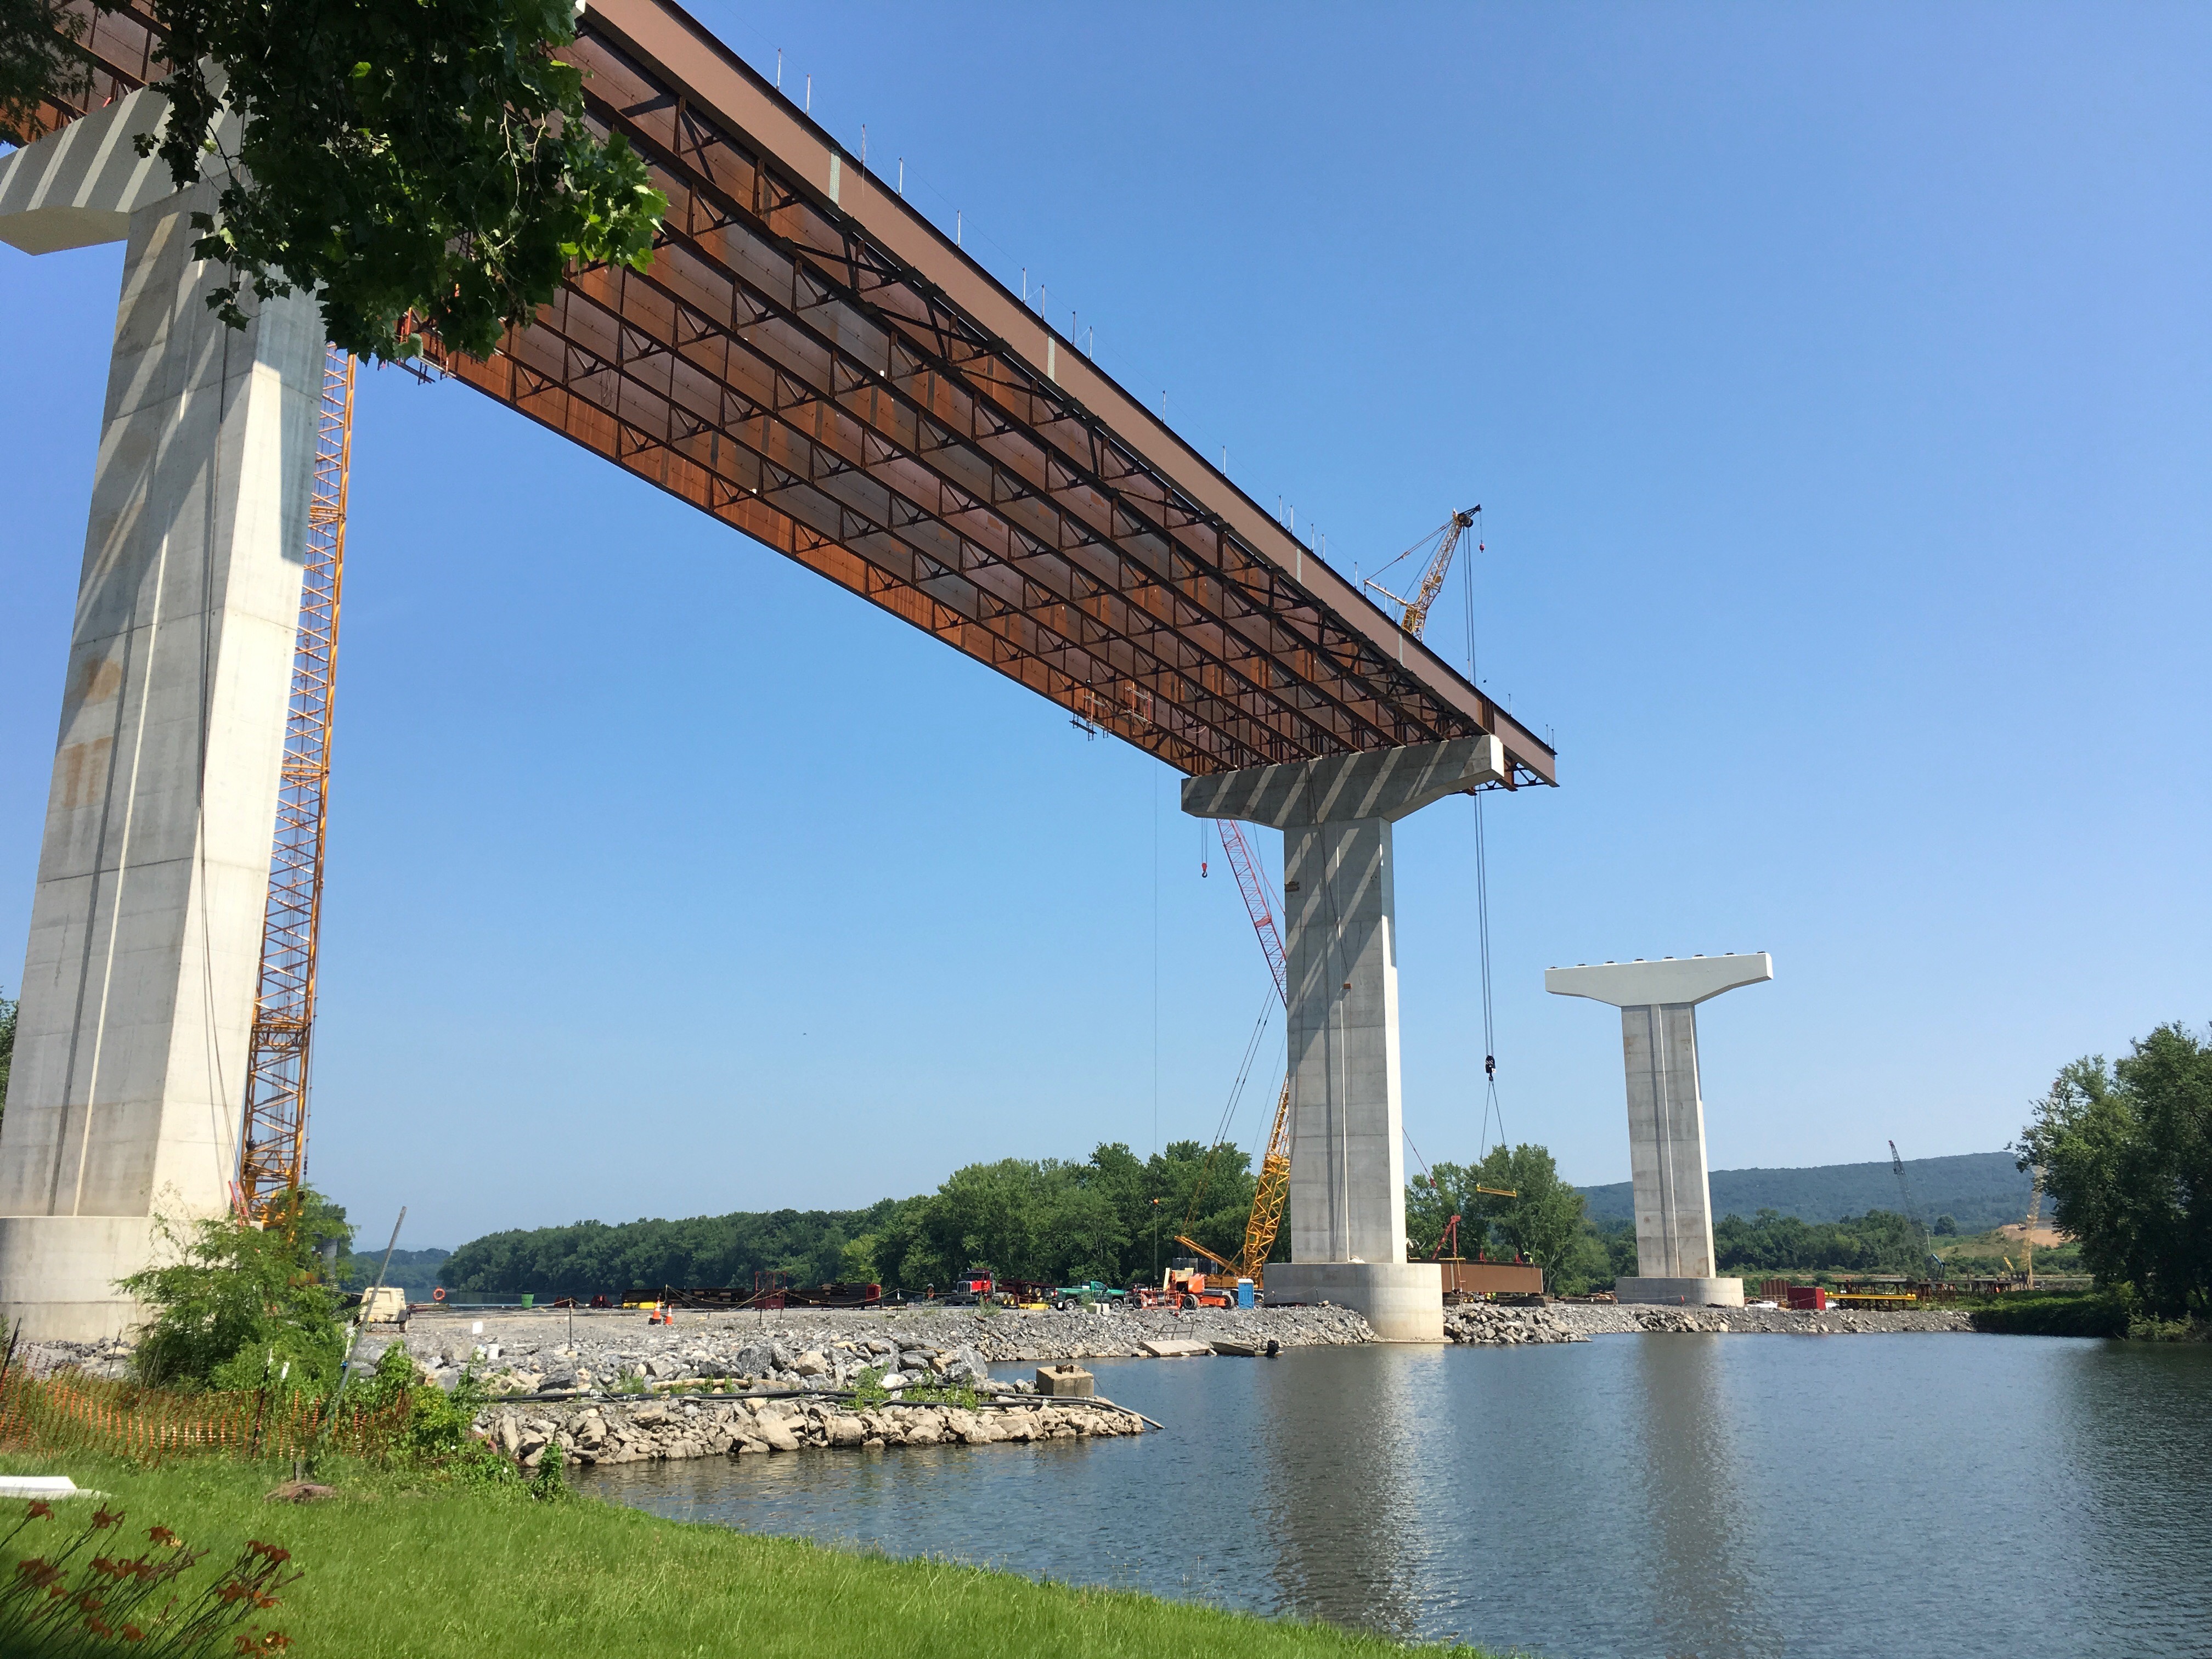 A bridge with concrete supports and steel beams is constructed along a river. In the background, a crane begins to lift a steel beam into place.